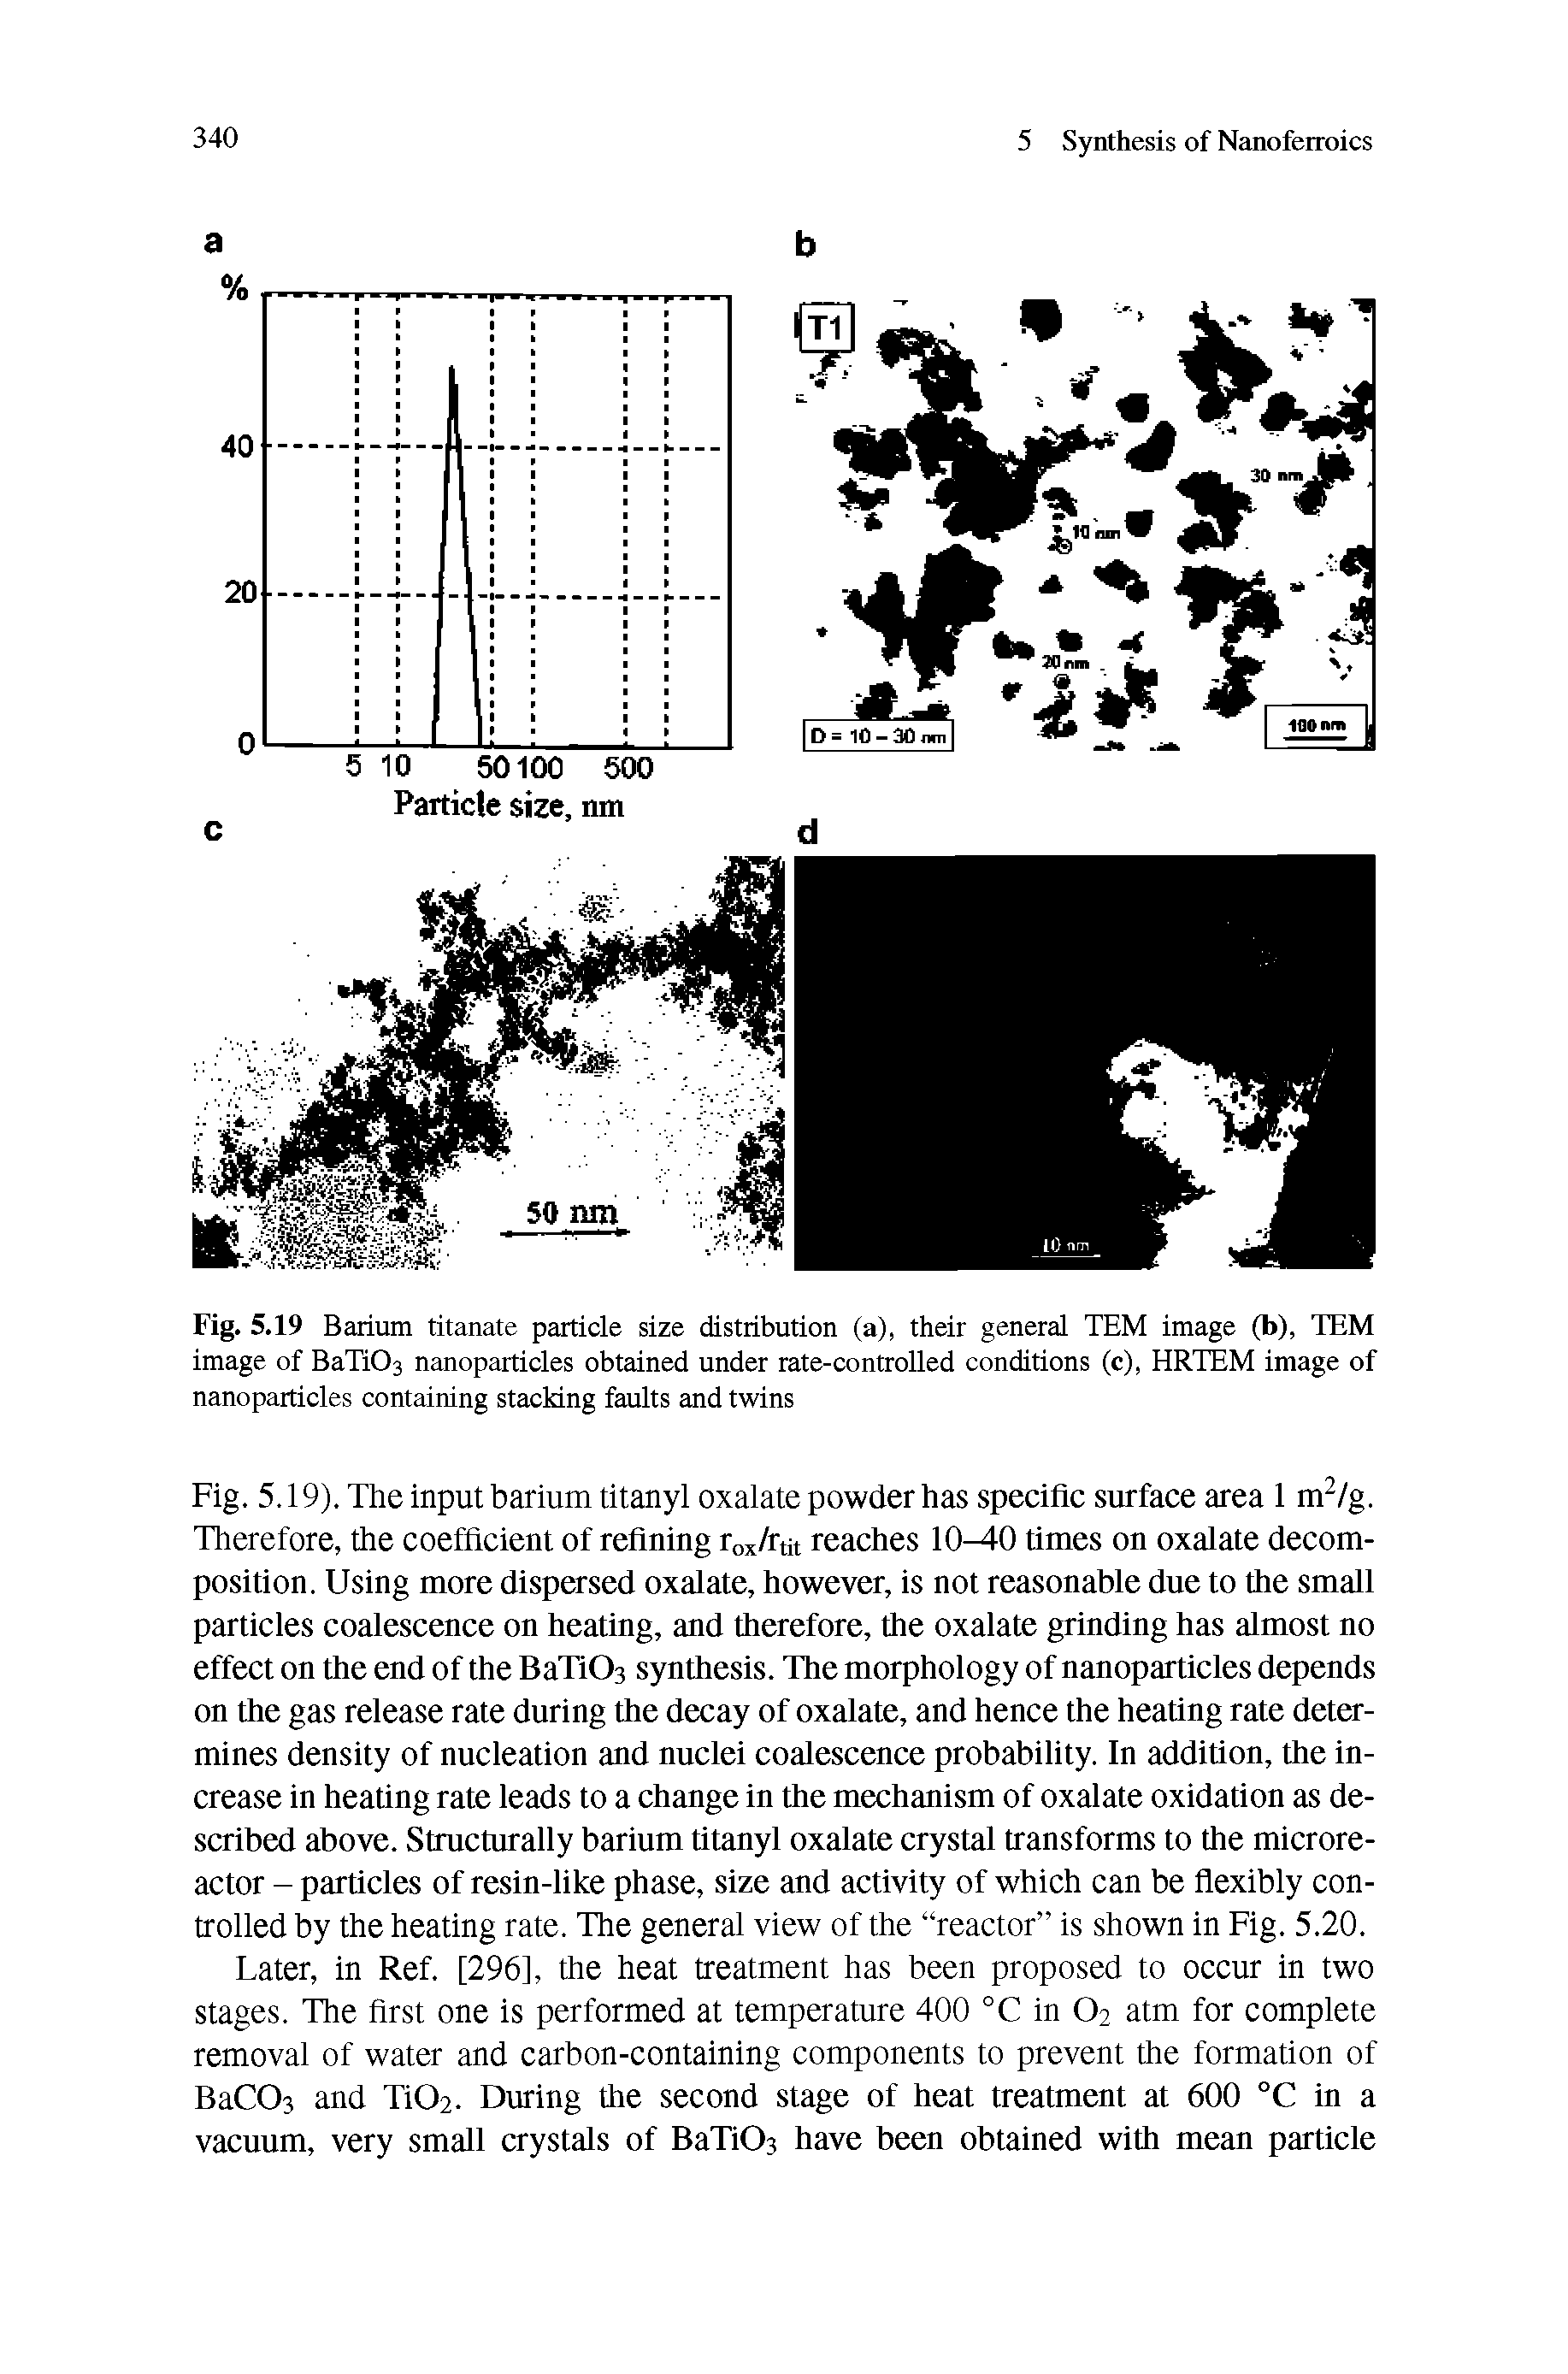 Fig. 5.19). The input barium titanyl oxalate powder has specific surface area 1 m /g. Therefore, the coefficient of refining rox/rut reaches 10 0 times on oxalate decomposition. Using more dispersed oxalate, however, is not reasonable due to the small particles coalescence on heating, and therefore, the oxalate grinding has almost no effect on the end of the BaTiOs synthesis. The morphology of nanoparticles depends on the gas release rate during the decay of oxalate, and hence the heating rate determines density of nucleation and nuclei coalescence probability. In addition, the increase in heating rate leads to a change in the mechanism of oxalate oxidation as described above. Structurally barium titanyl oxalate crystal transforms to the microreactor - particles of resin-like phase, size and activity of which can be flexibly controlled by the heating rate. The general view of the reactor is shown in Fig. 5.20.